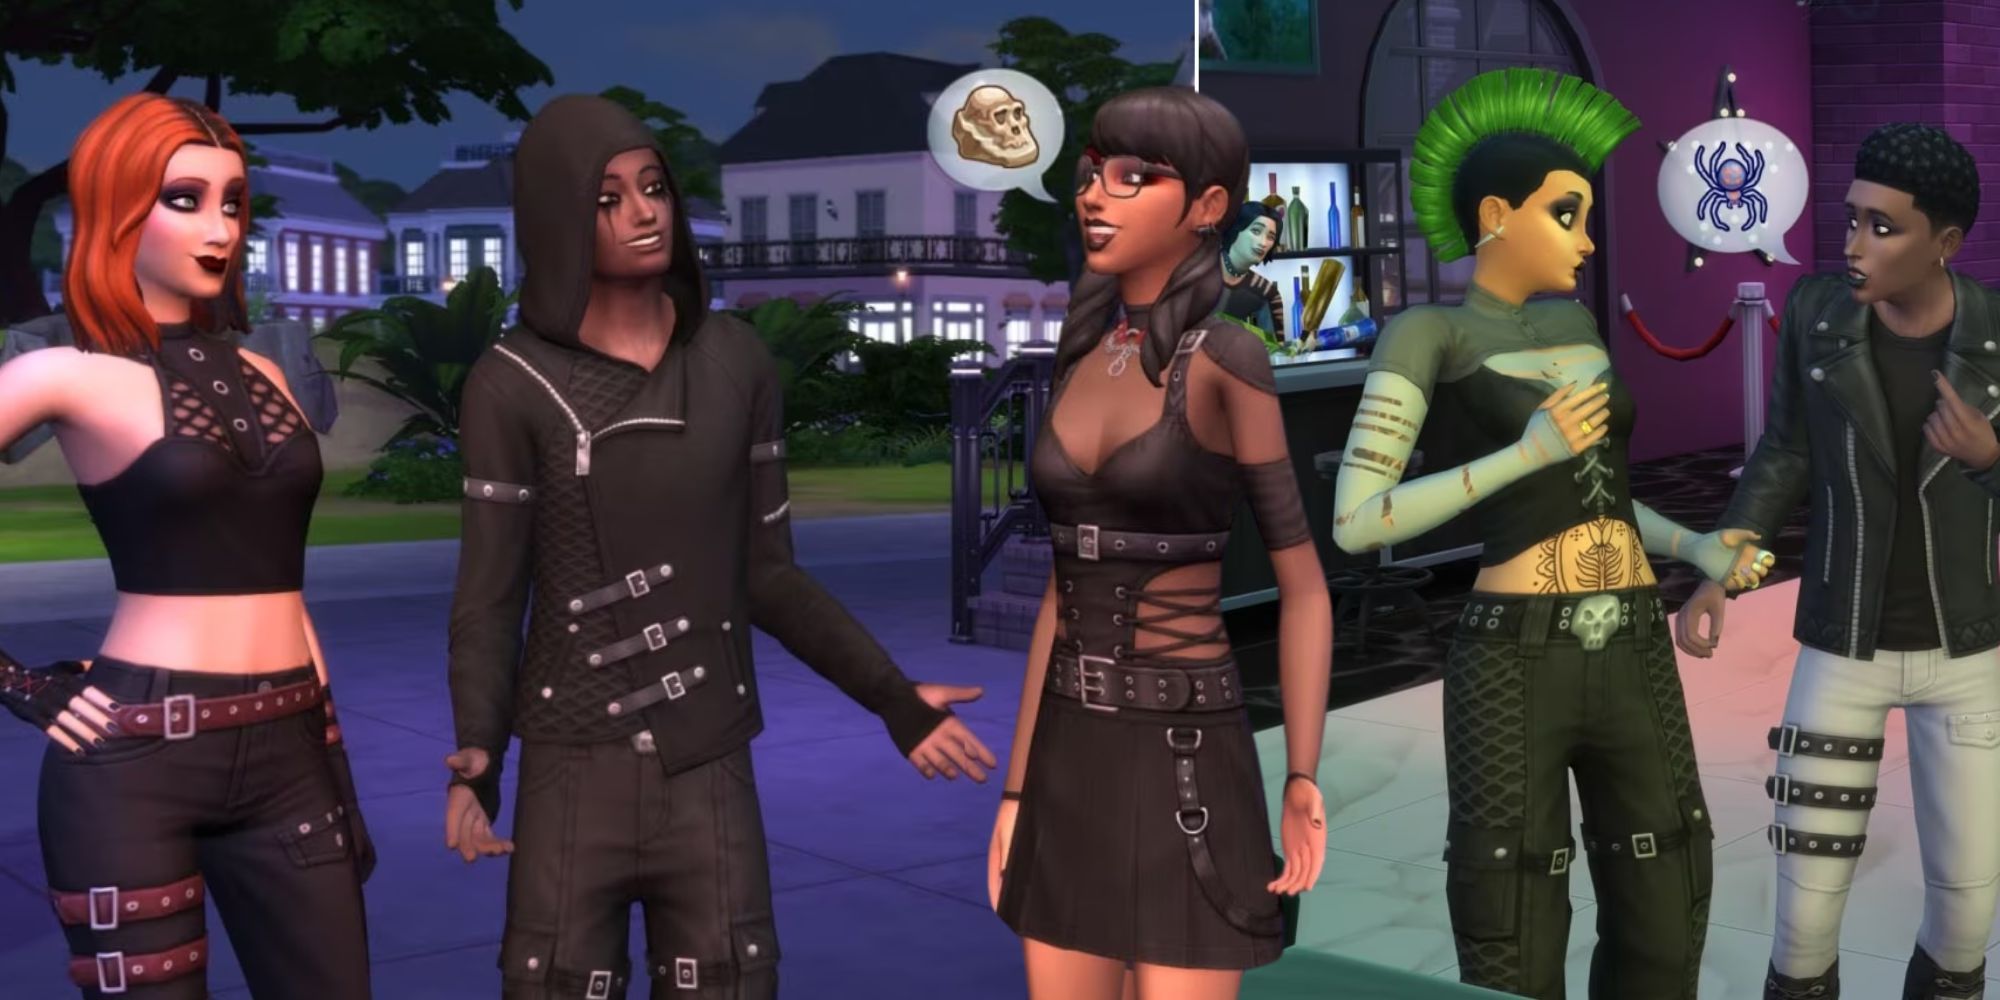 sims 4 sims chatting with each other while wearing clothes from the sims 4